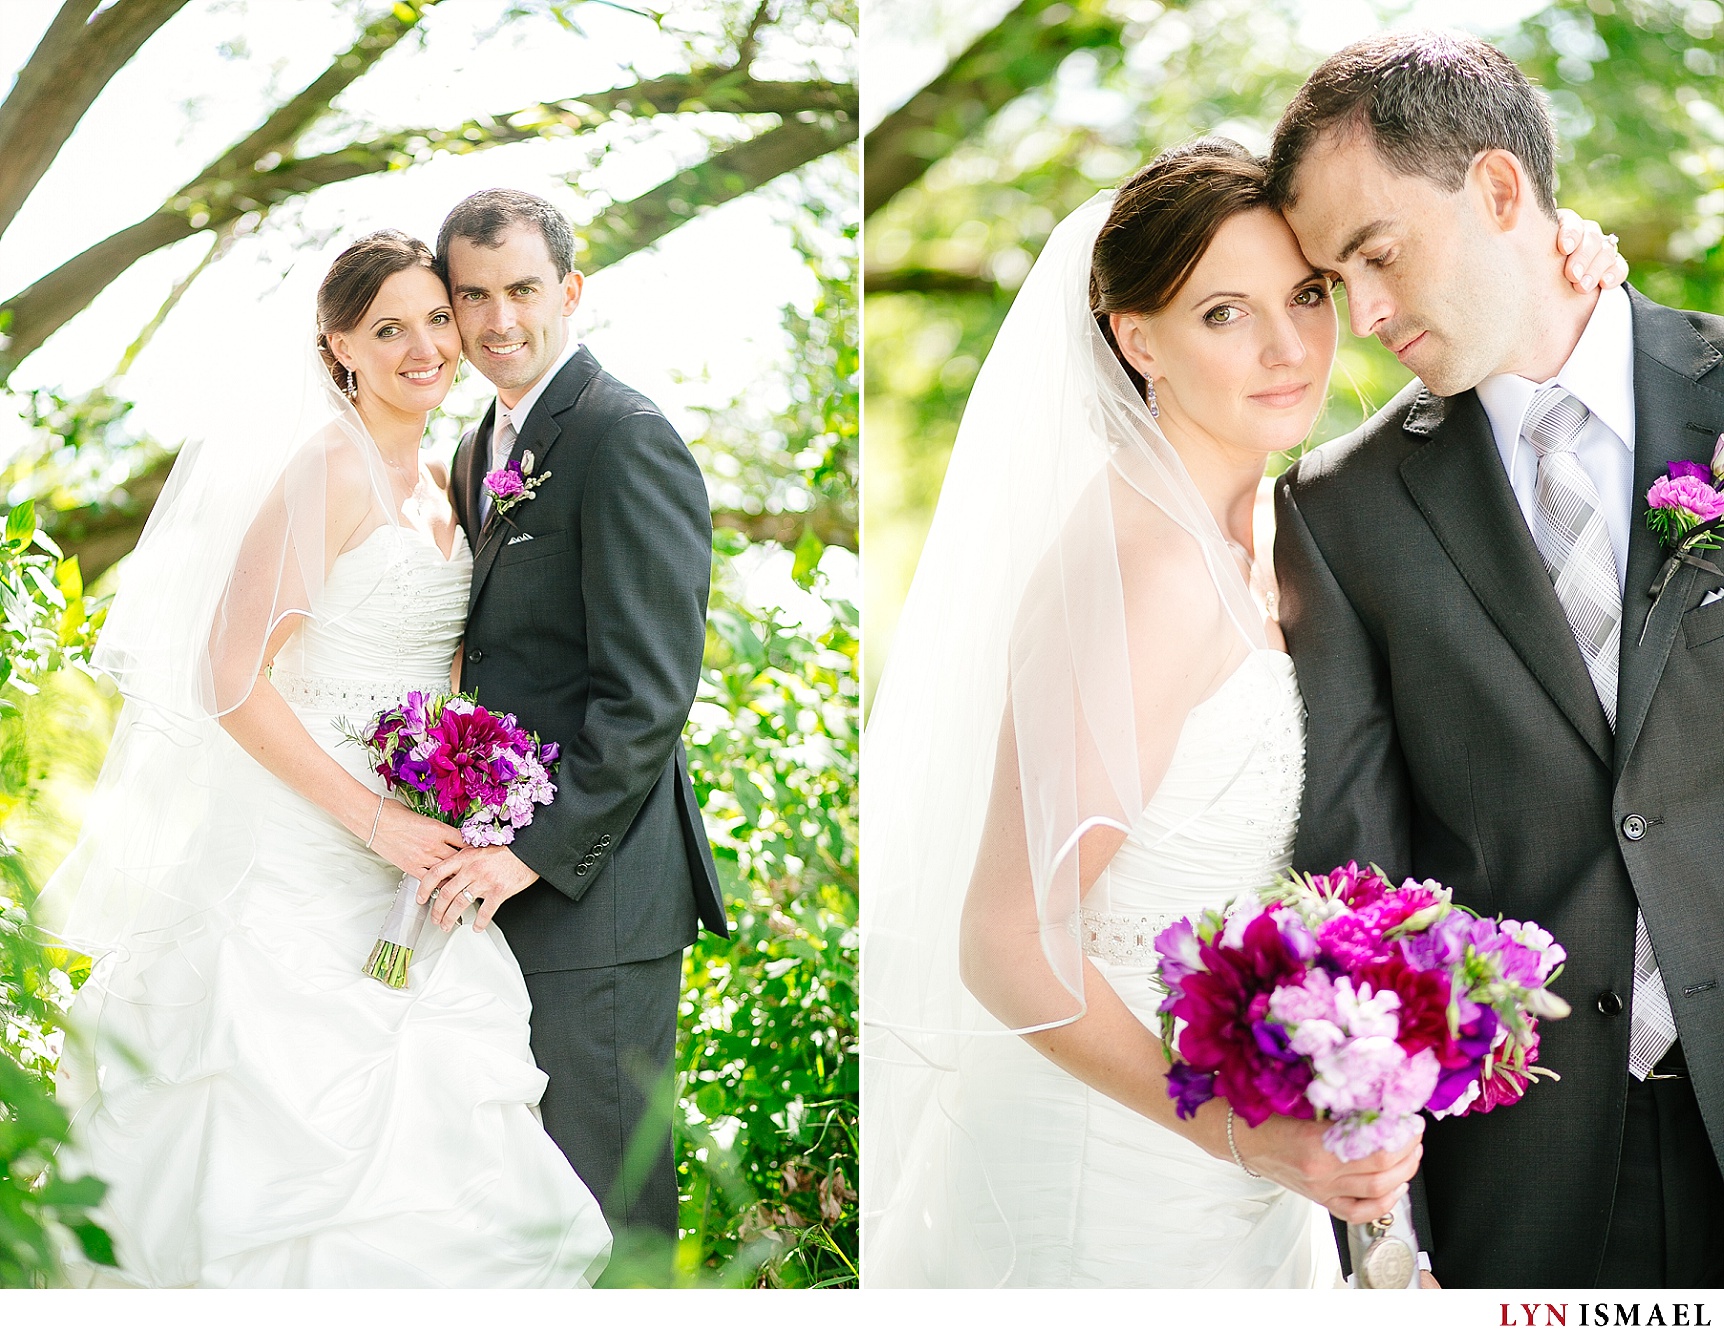 Romantic portraits of the bride and groom by Waterloo wedding phtoographer.